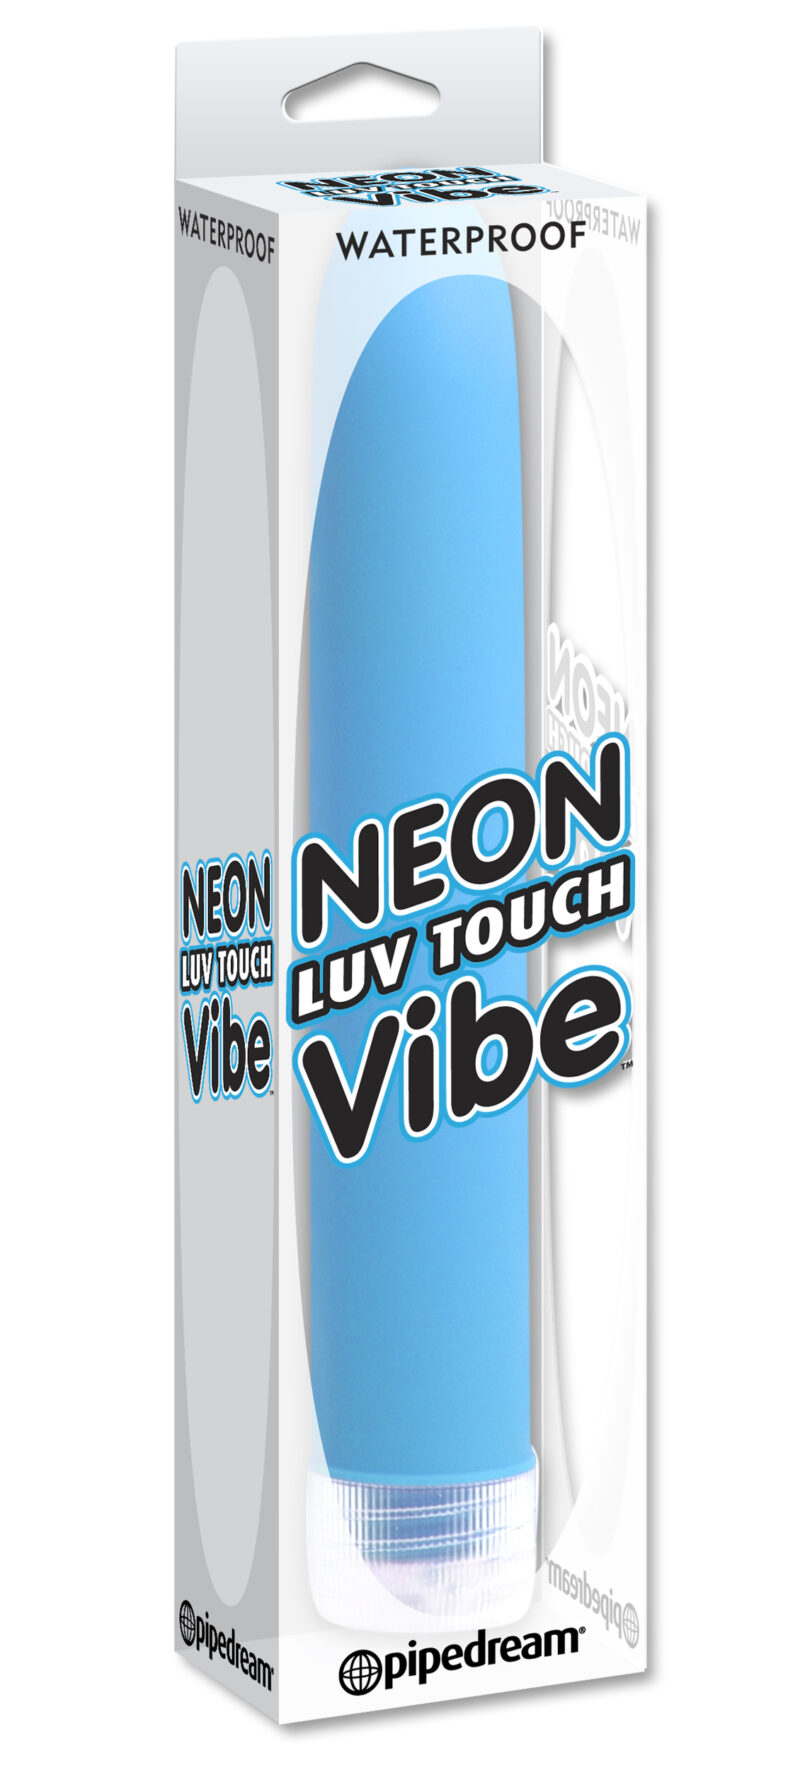 Pipedream Neon Luv Touch Vibe Blue